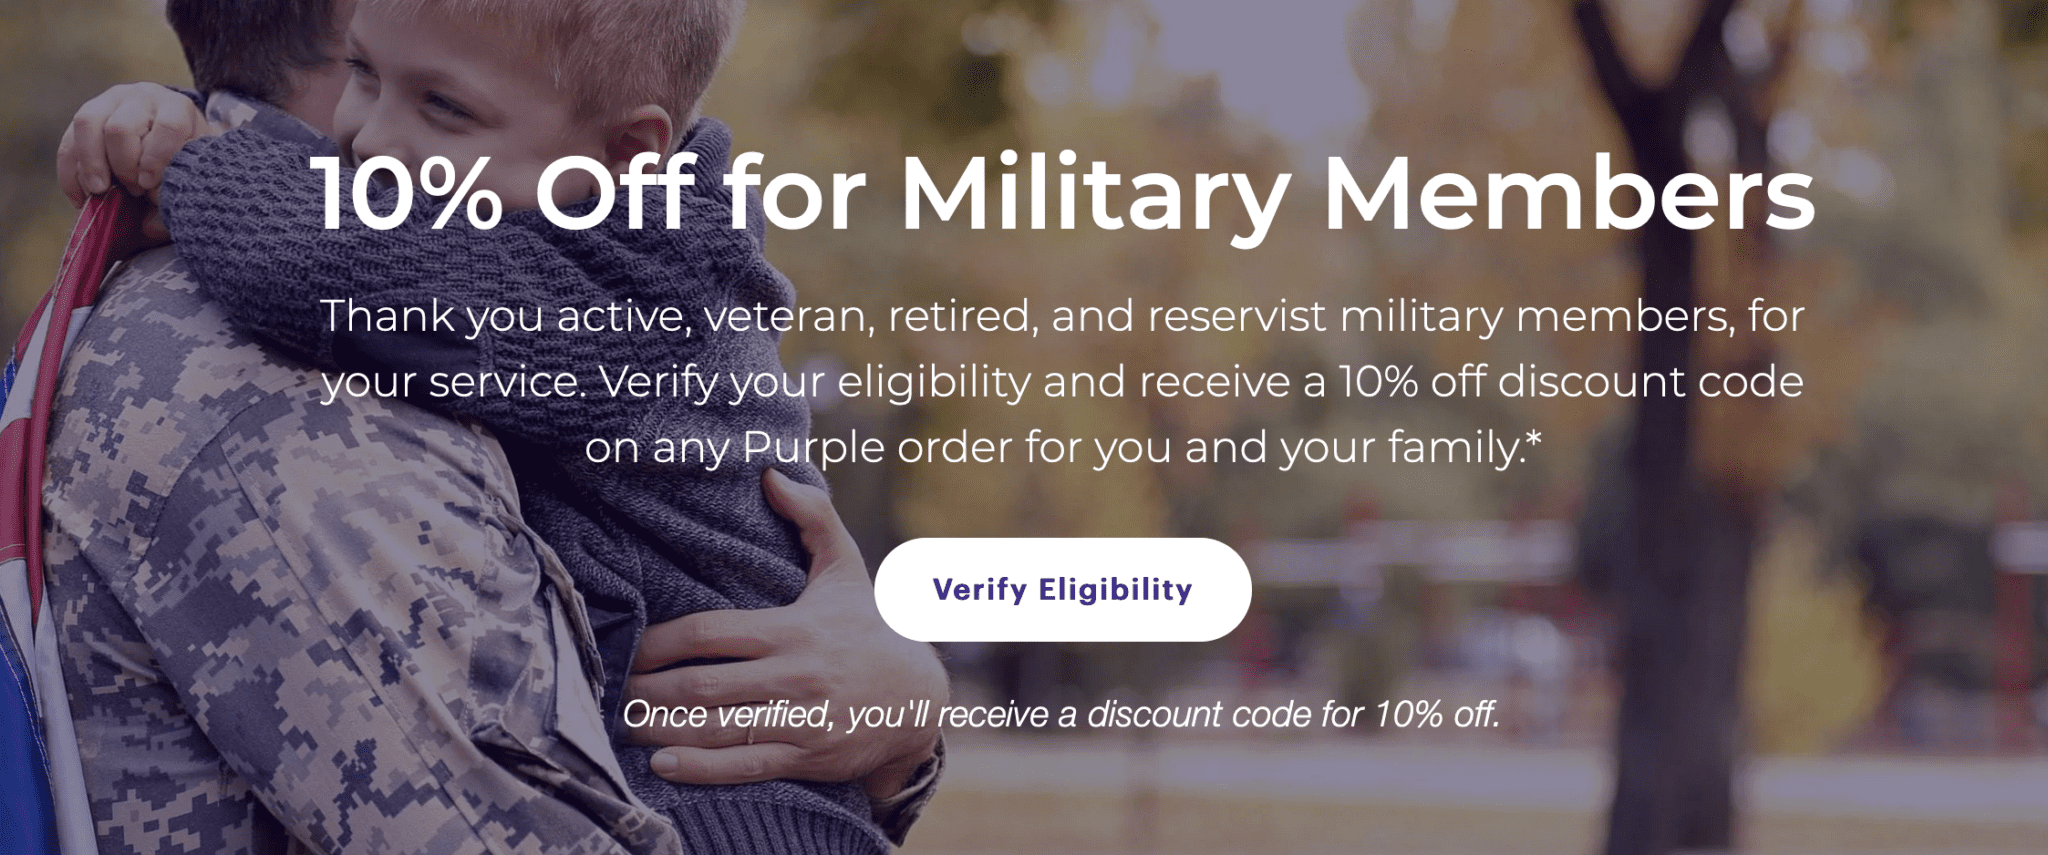 does purple mattress do military discount